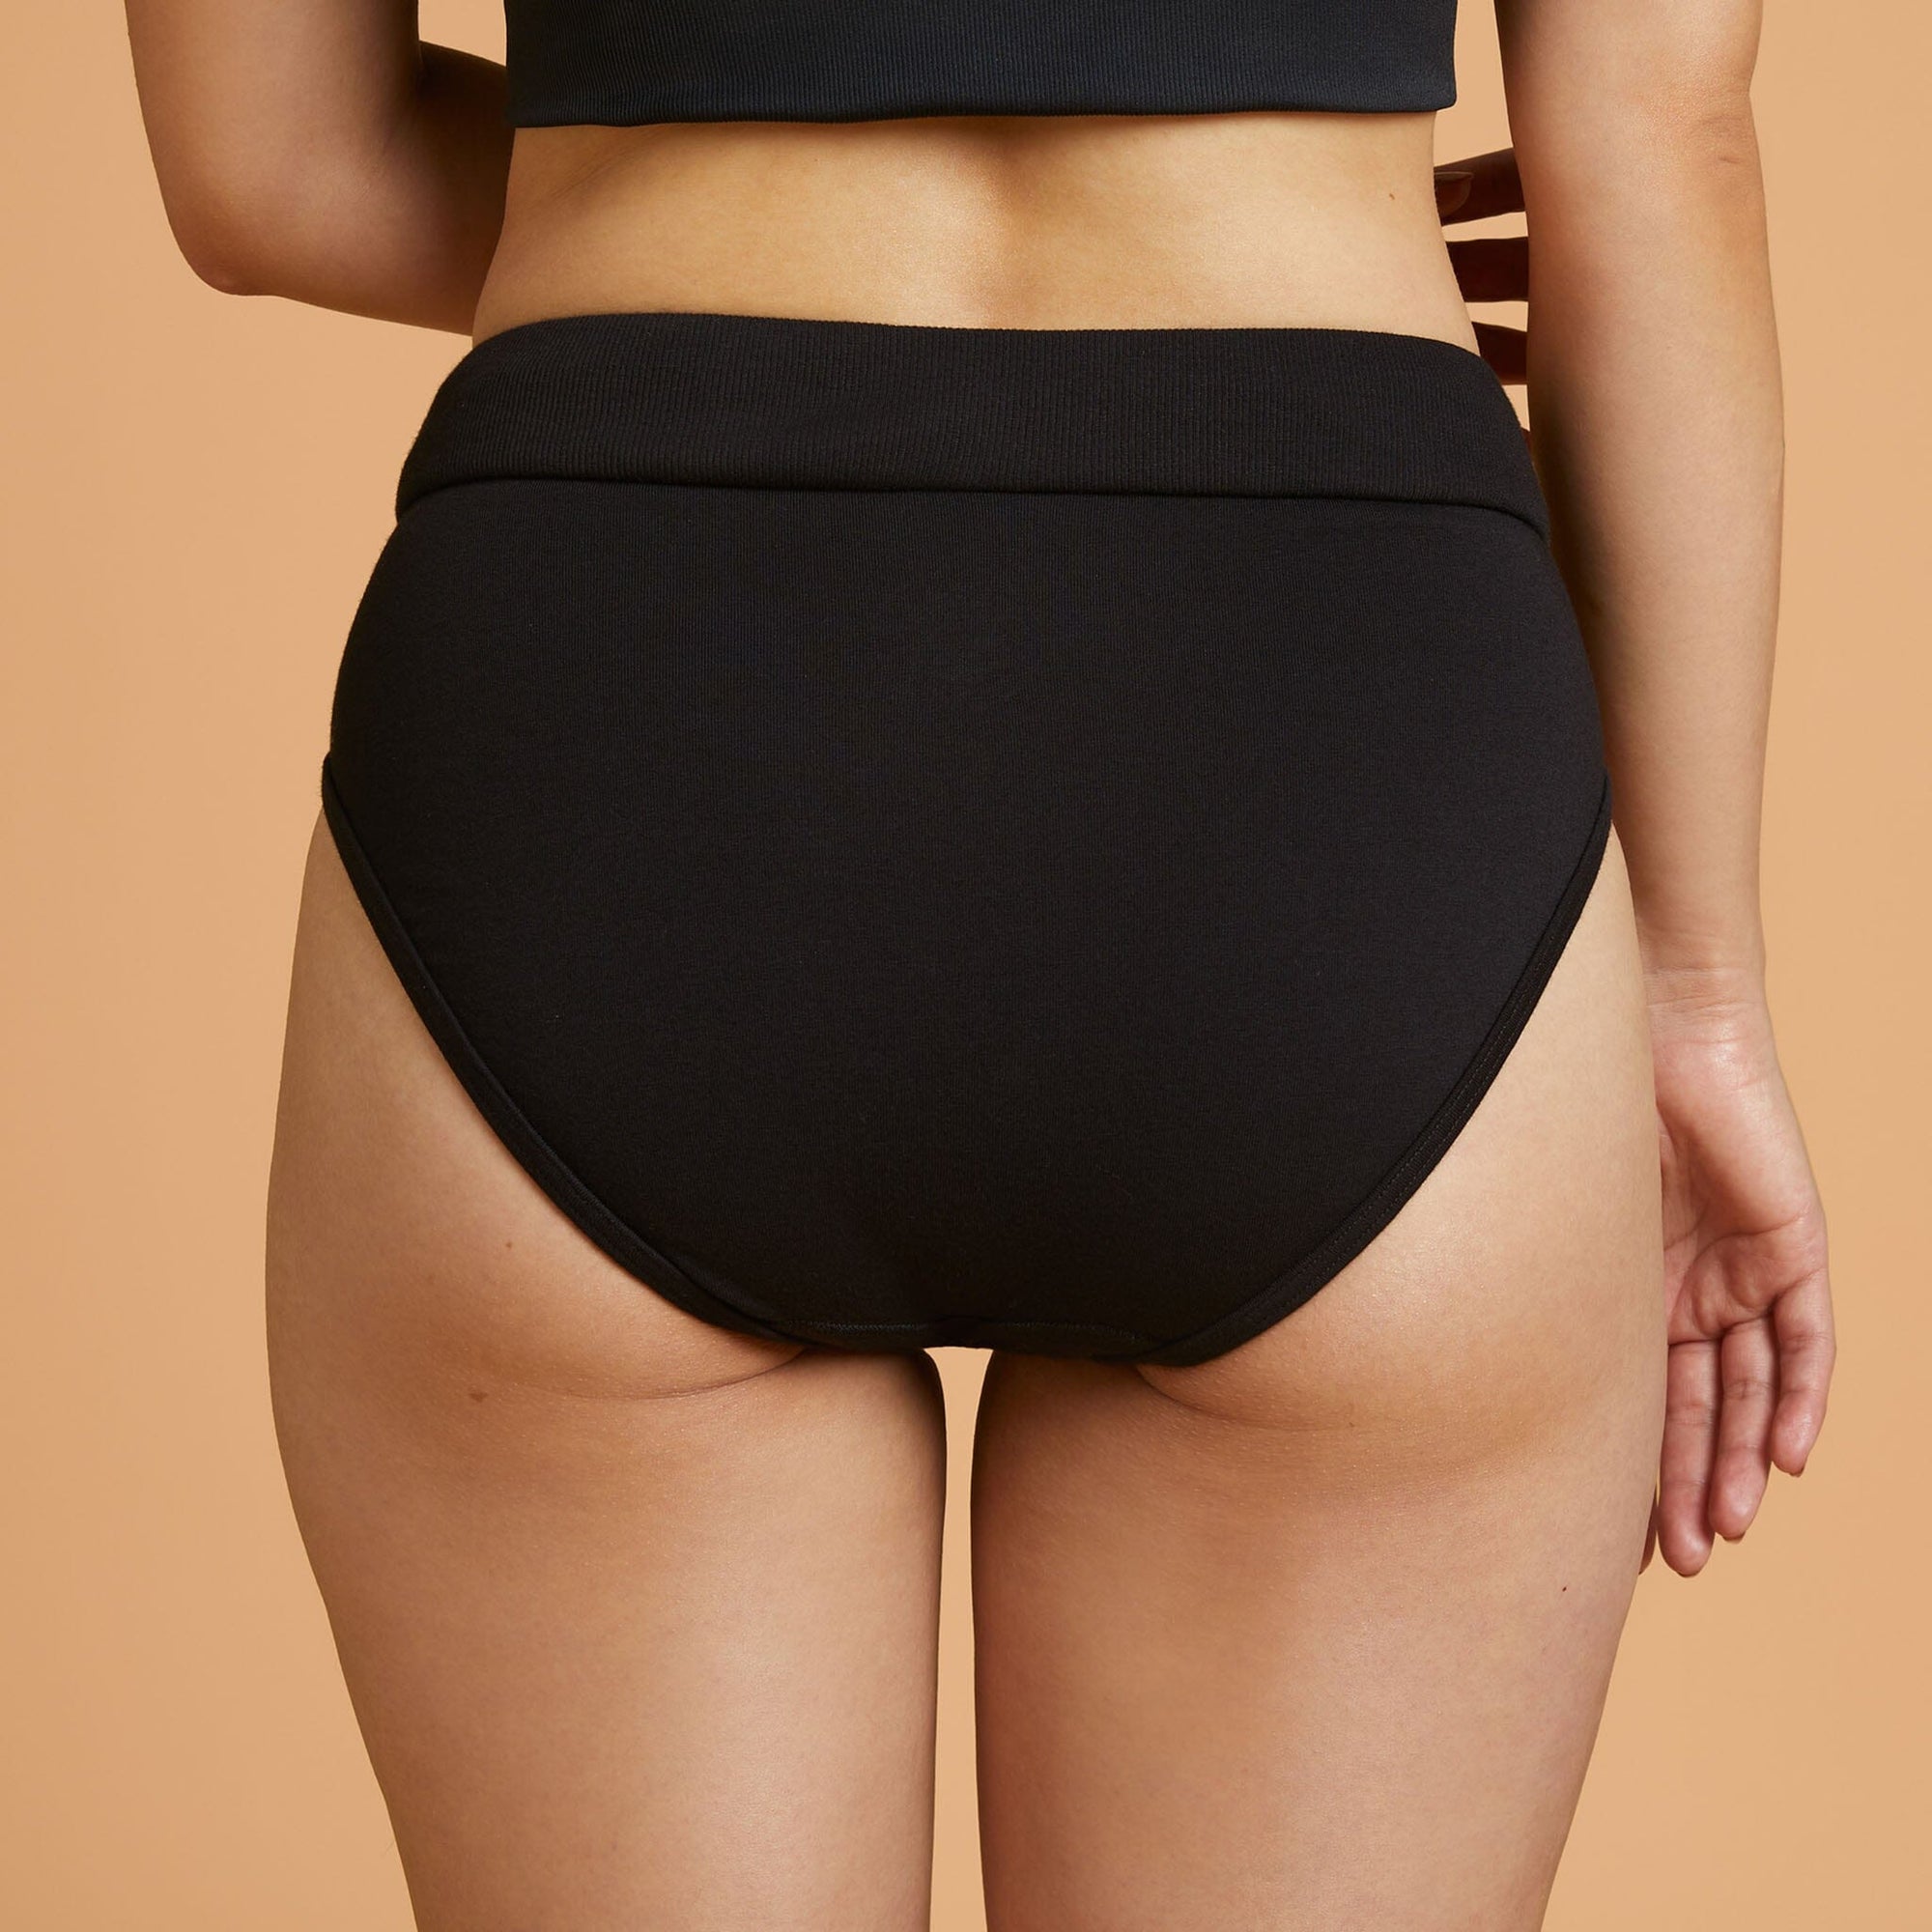 High Waist Velcro Panty with Velcro closure. Shown in black, back view.